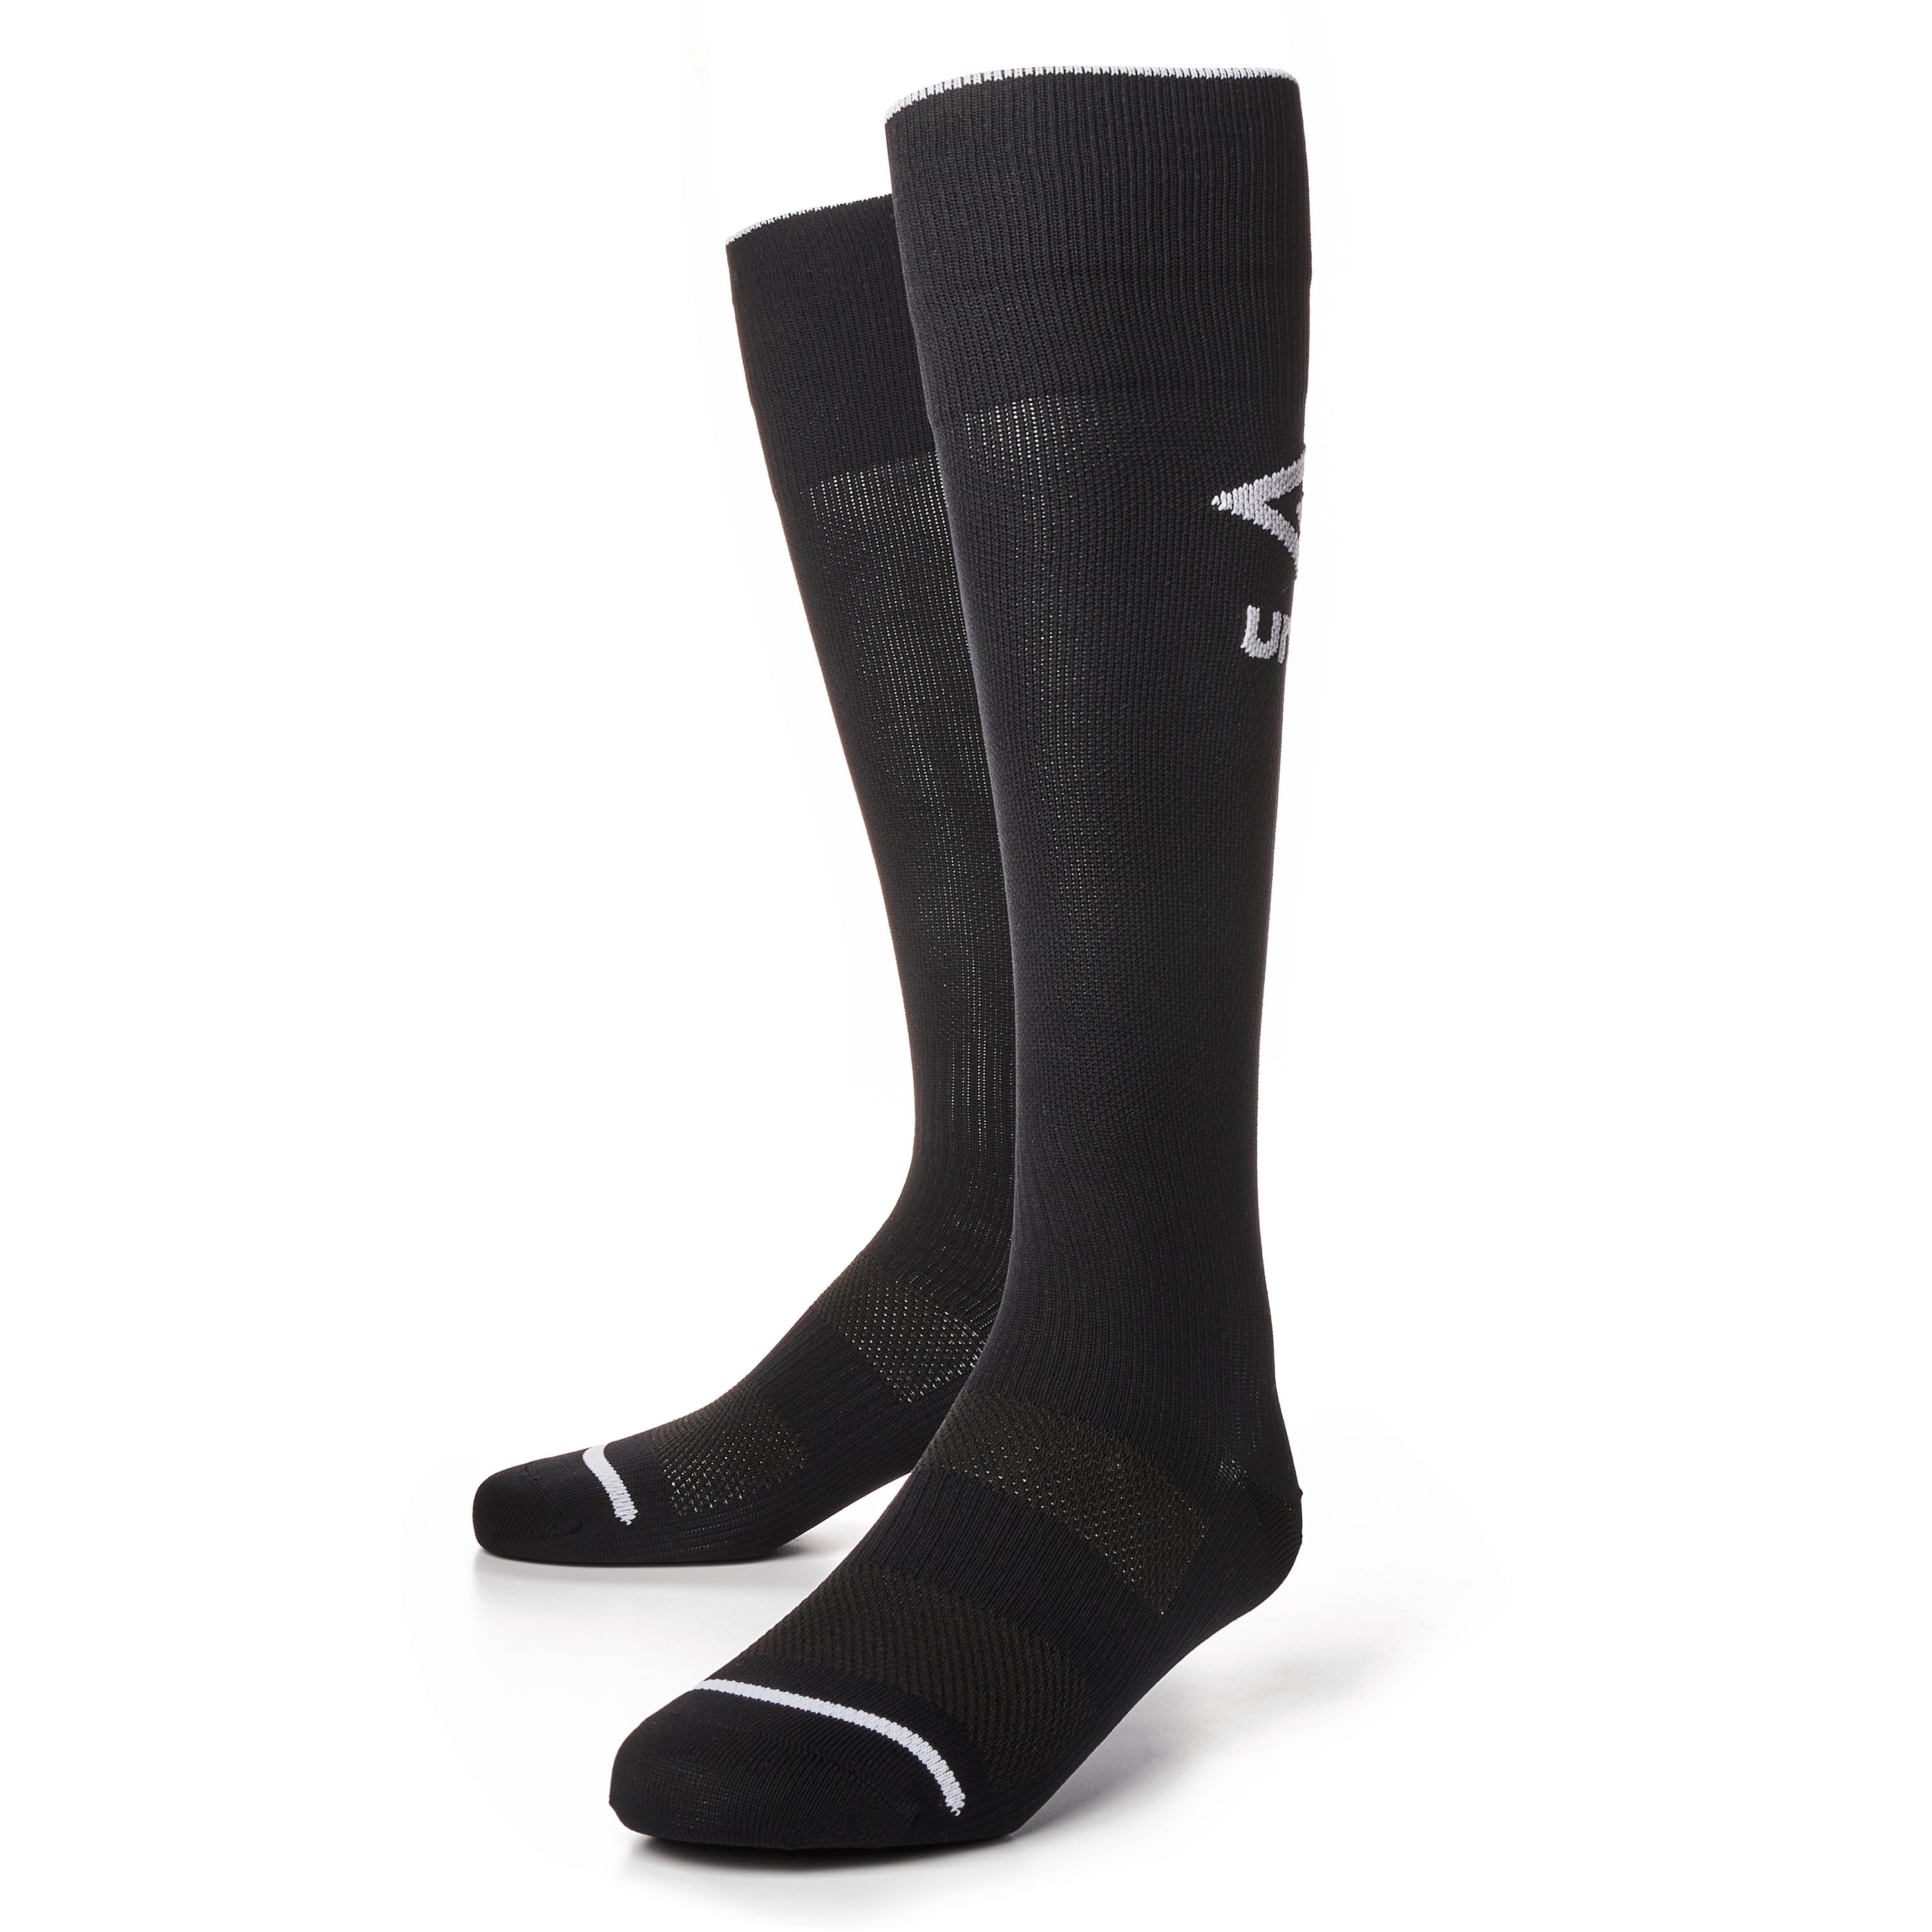 Starter Unisex Adult and Youth Soccer Socks Exclusive